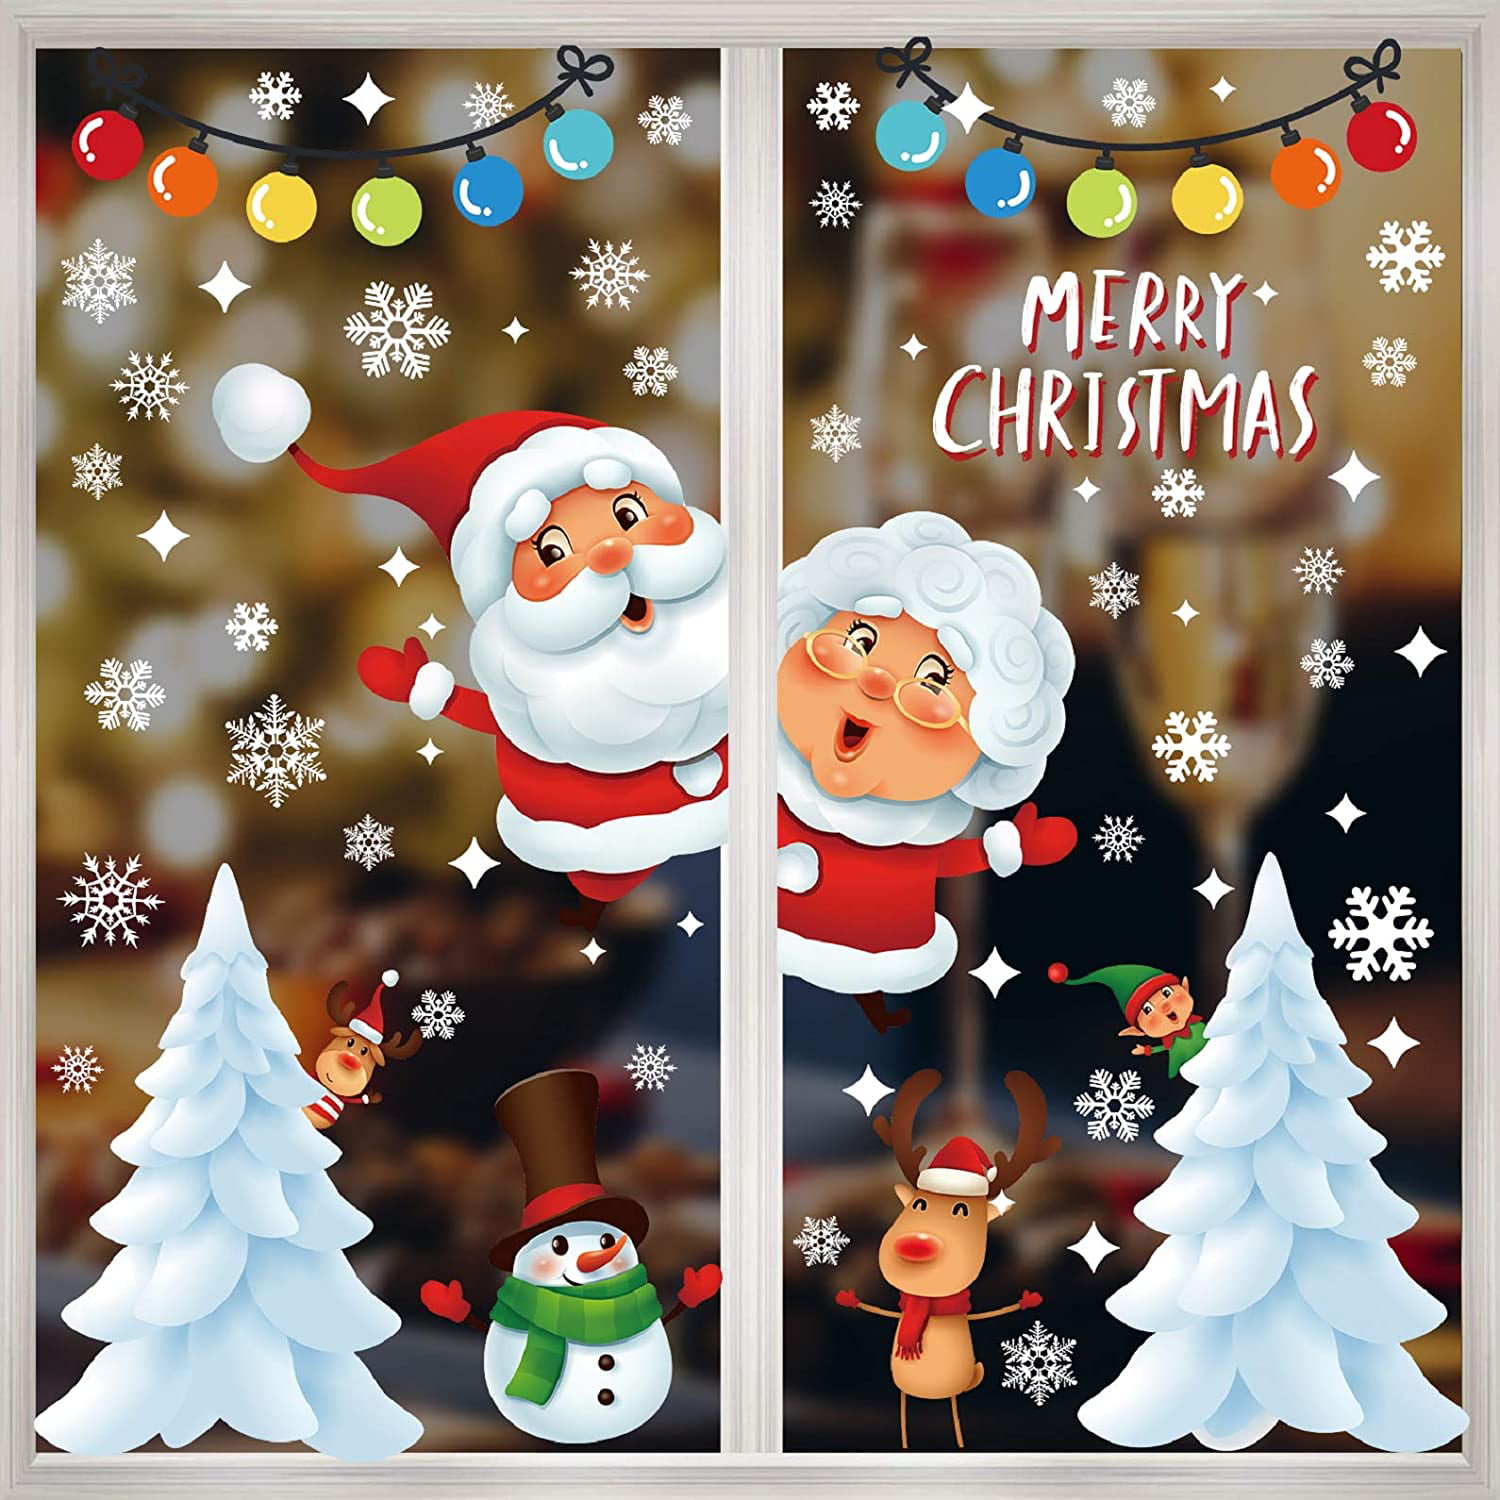 Extra Large Santa Snowman Xmas Tree Tree Stockings Snowflake Window Clings Ornaments Decal Merry Christmas Art Letter Static PVC Stickers Christmas Decorations